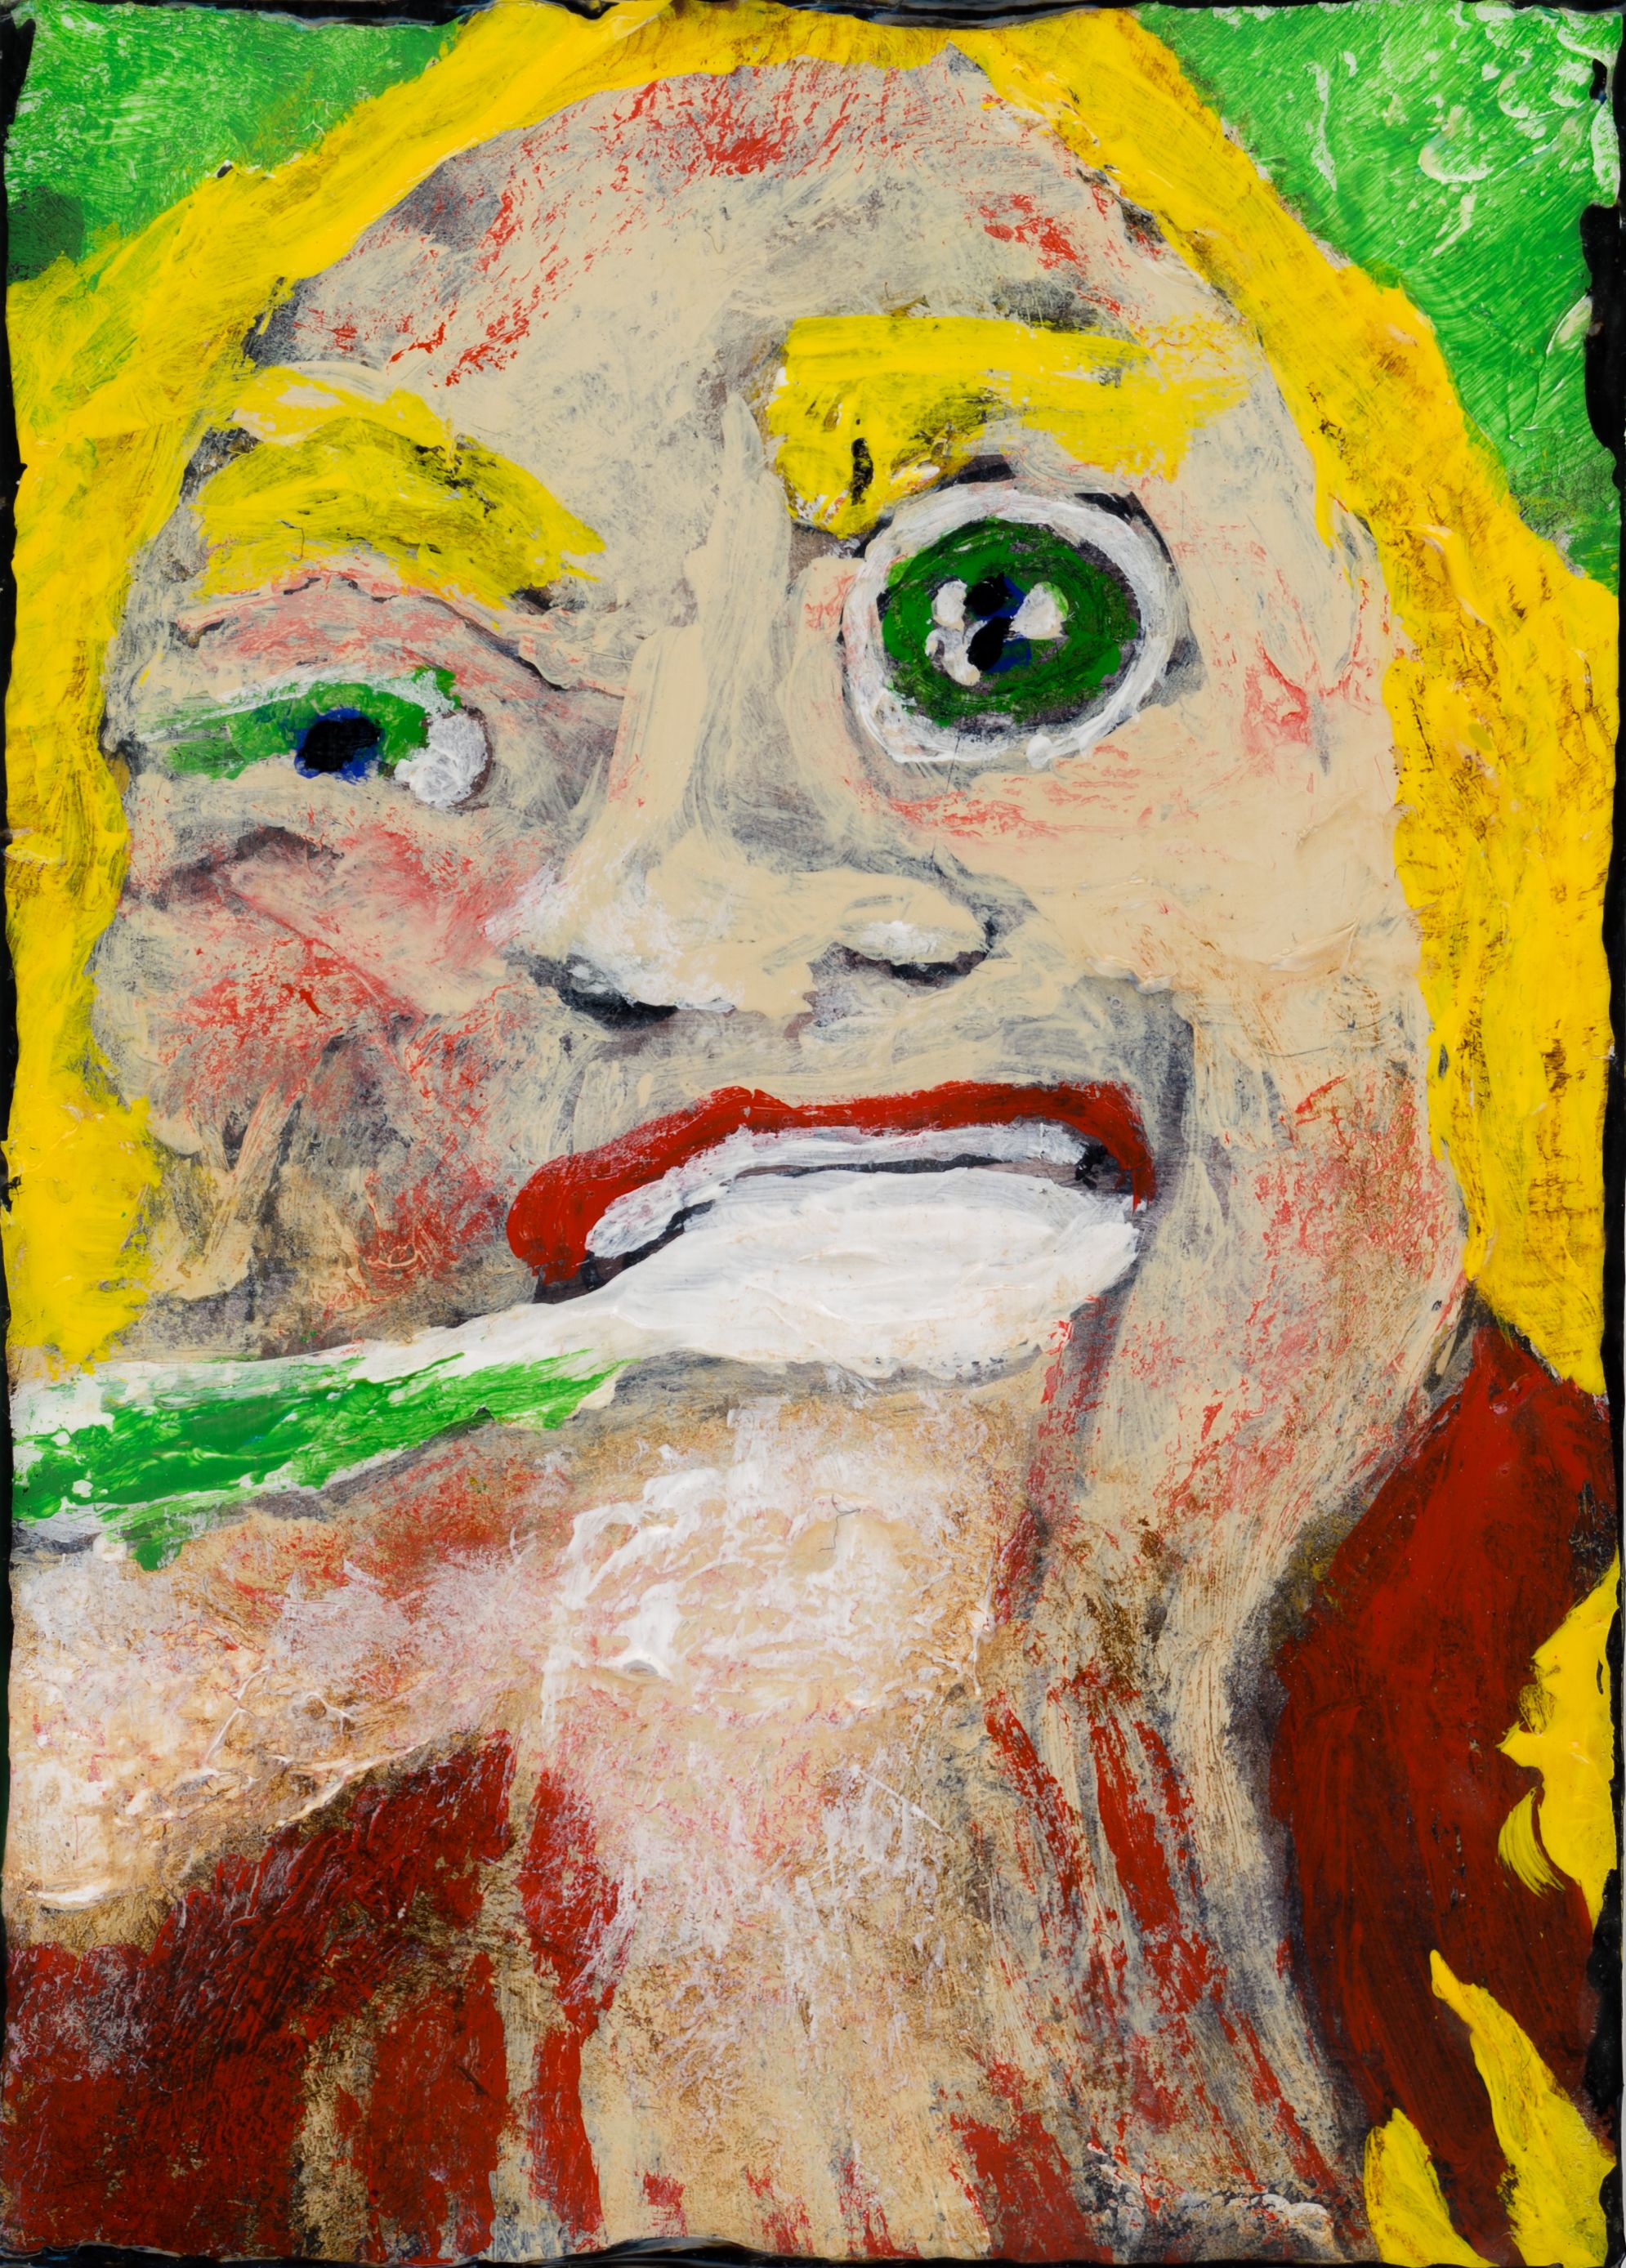 A painting of a person

Description automatically generated with low confidence